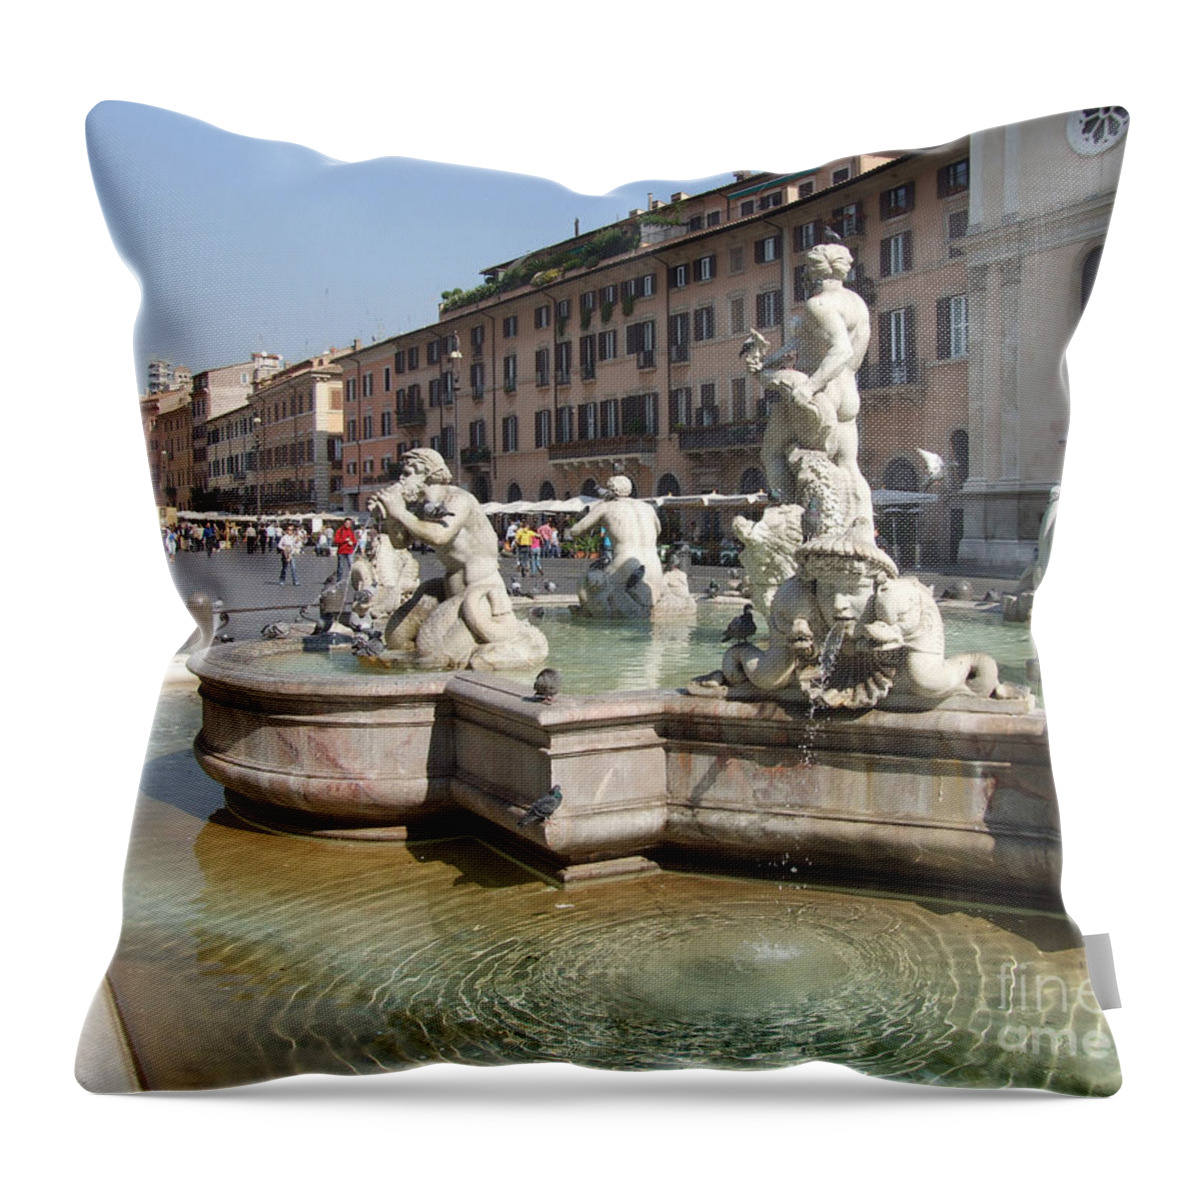 Piazza Navona Throw Pillow featuring the photograph Rome - Piazza Navona by Phil Banks